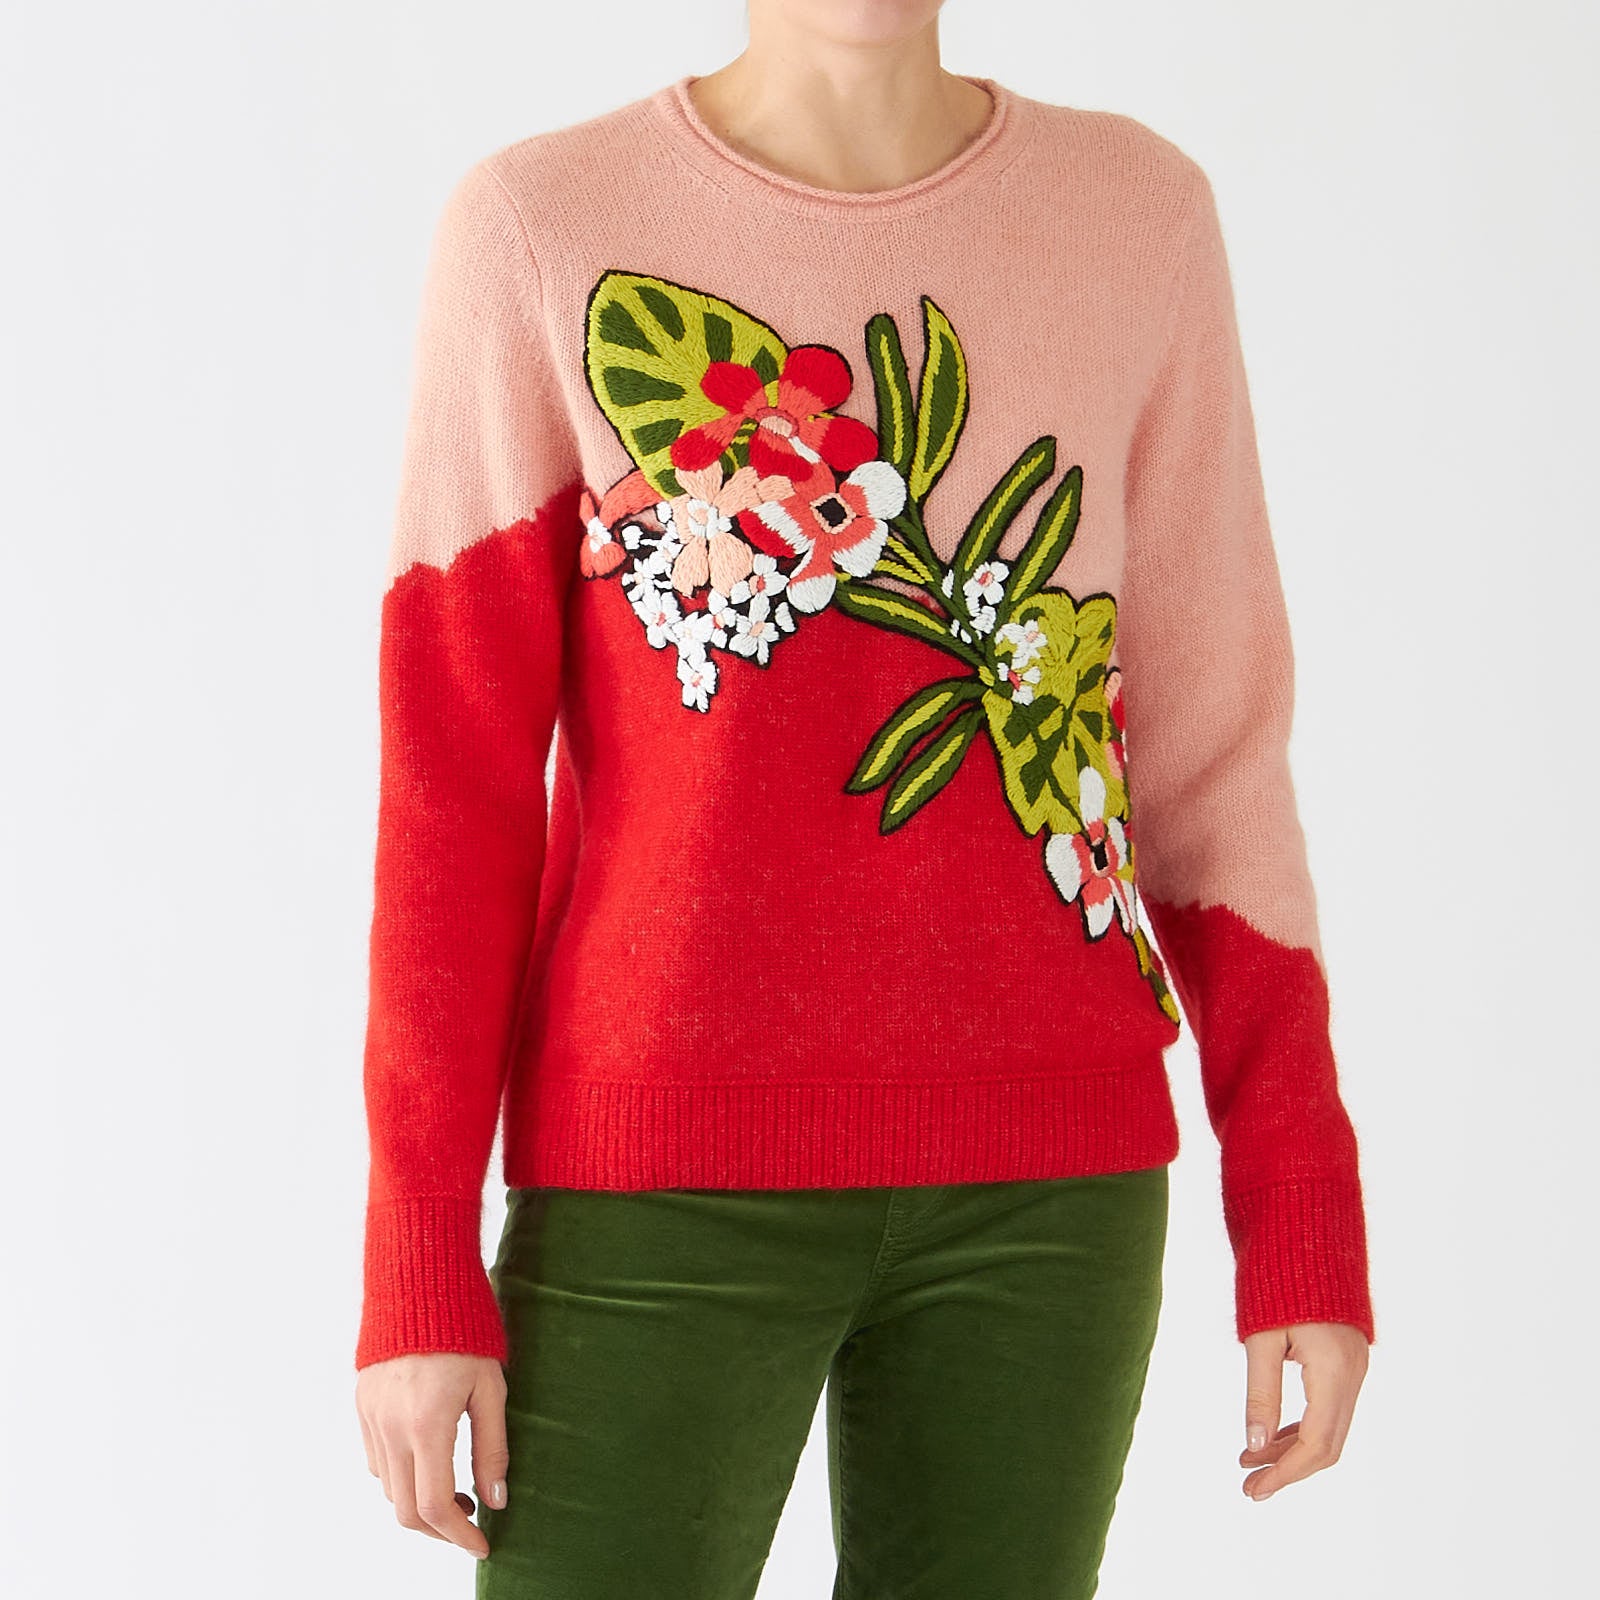 Bright Fire Red Floral Embroidered Sweater